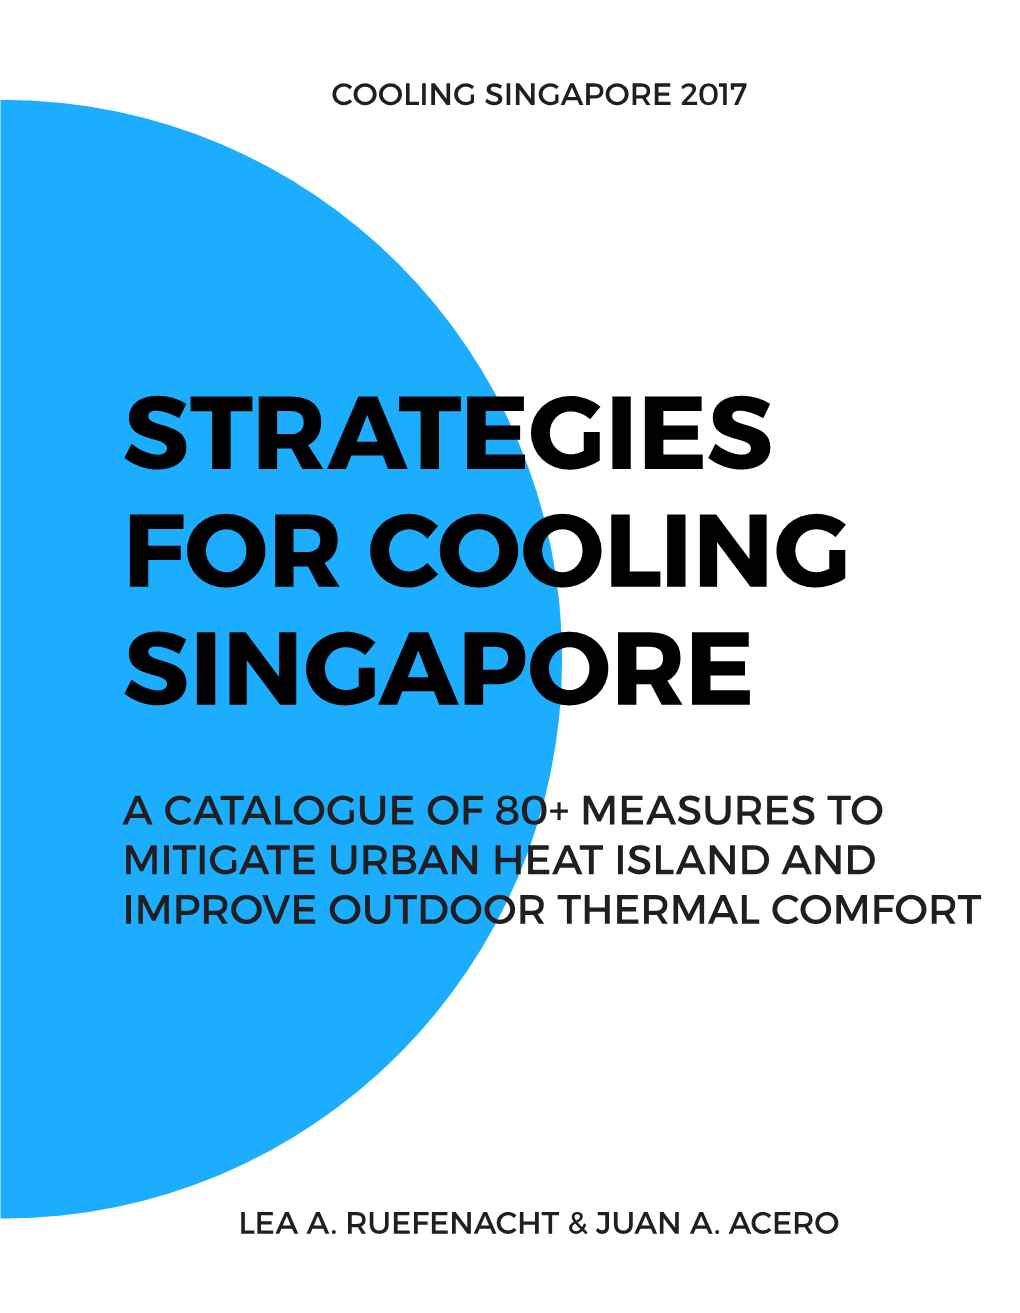 Strategies for Cooling Singapore